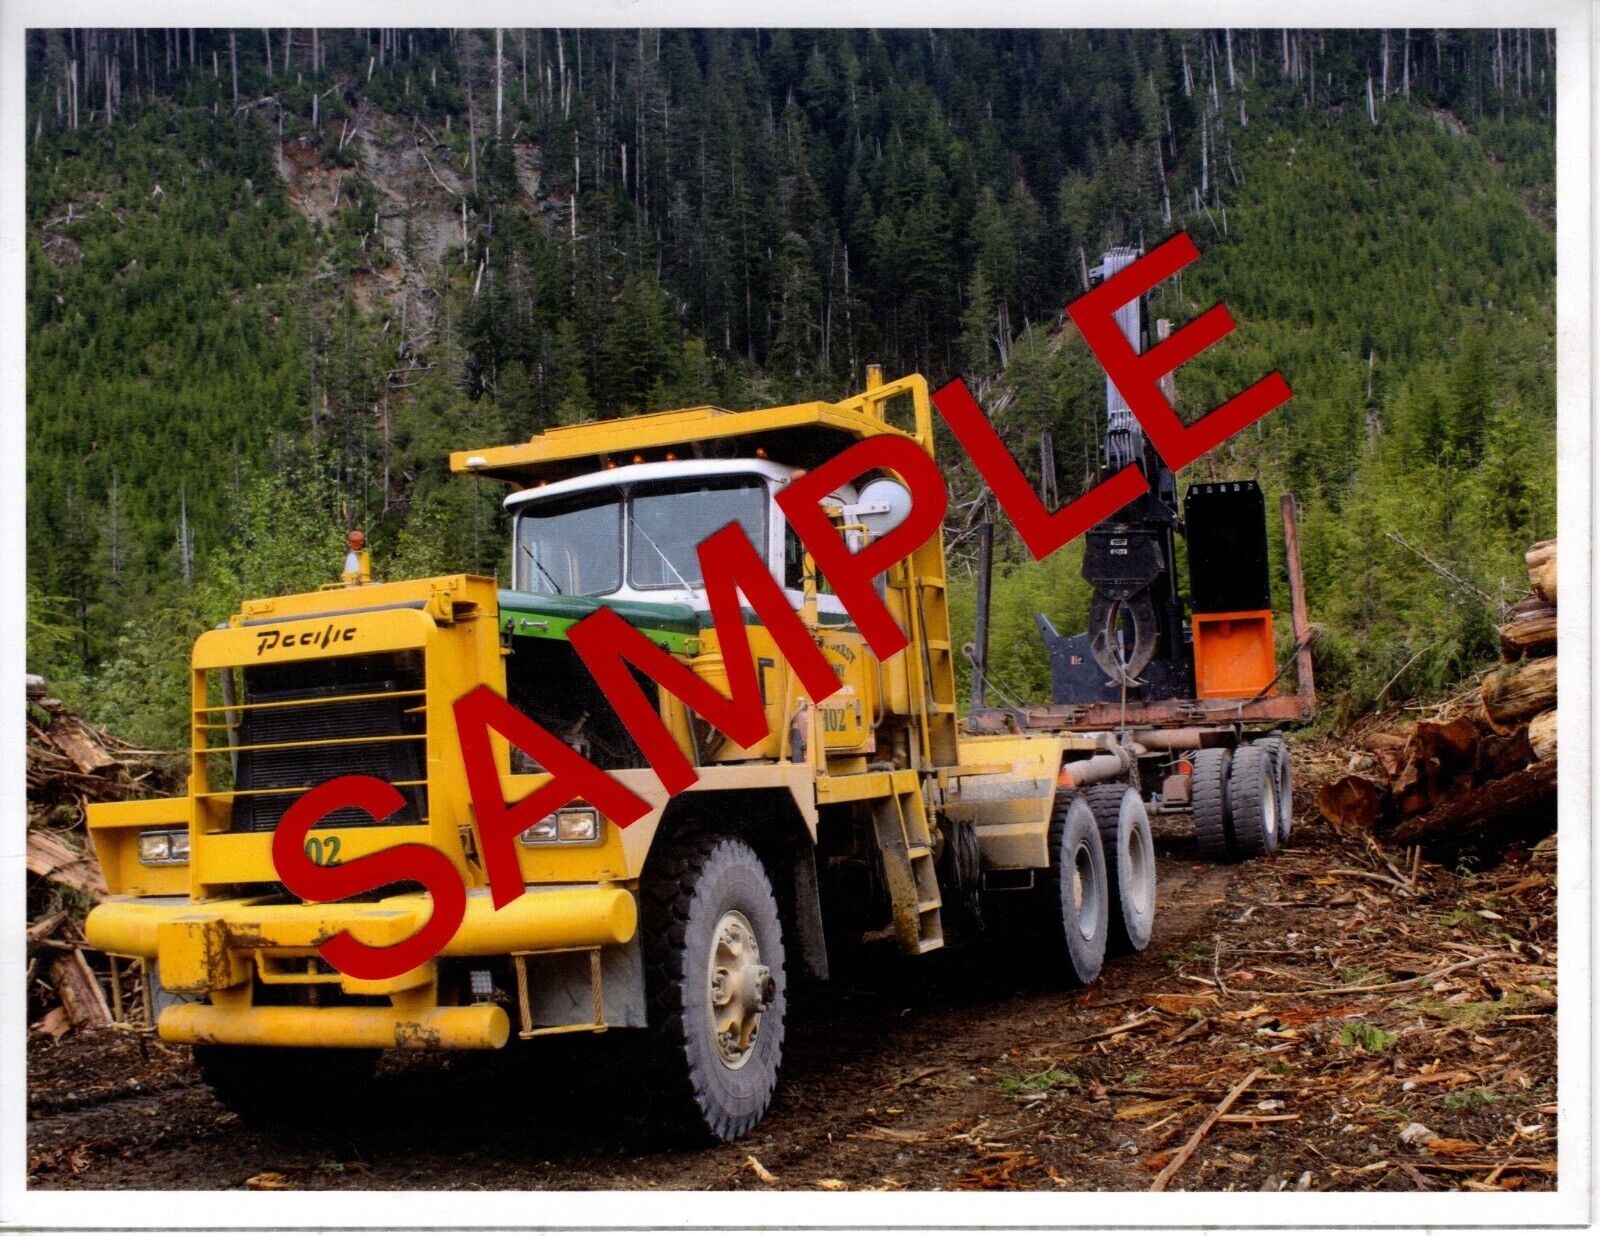 Pacific Log Truck on Vancouver Island, British Columbia,Canada, Cat Powered.